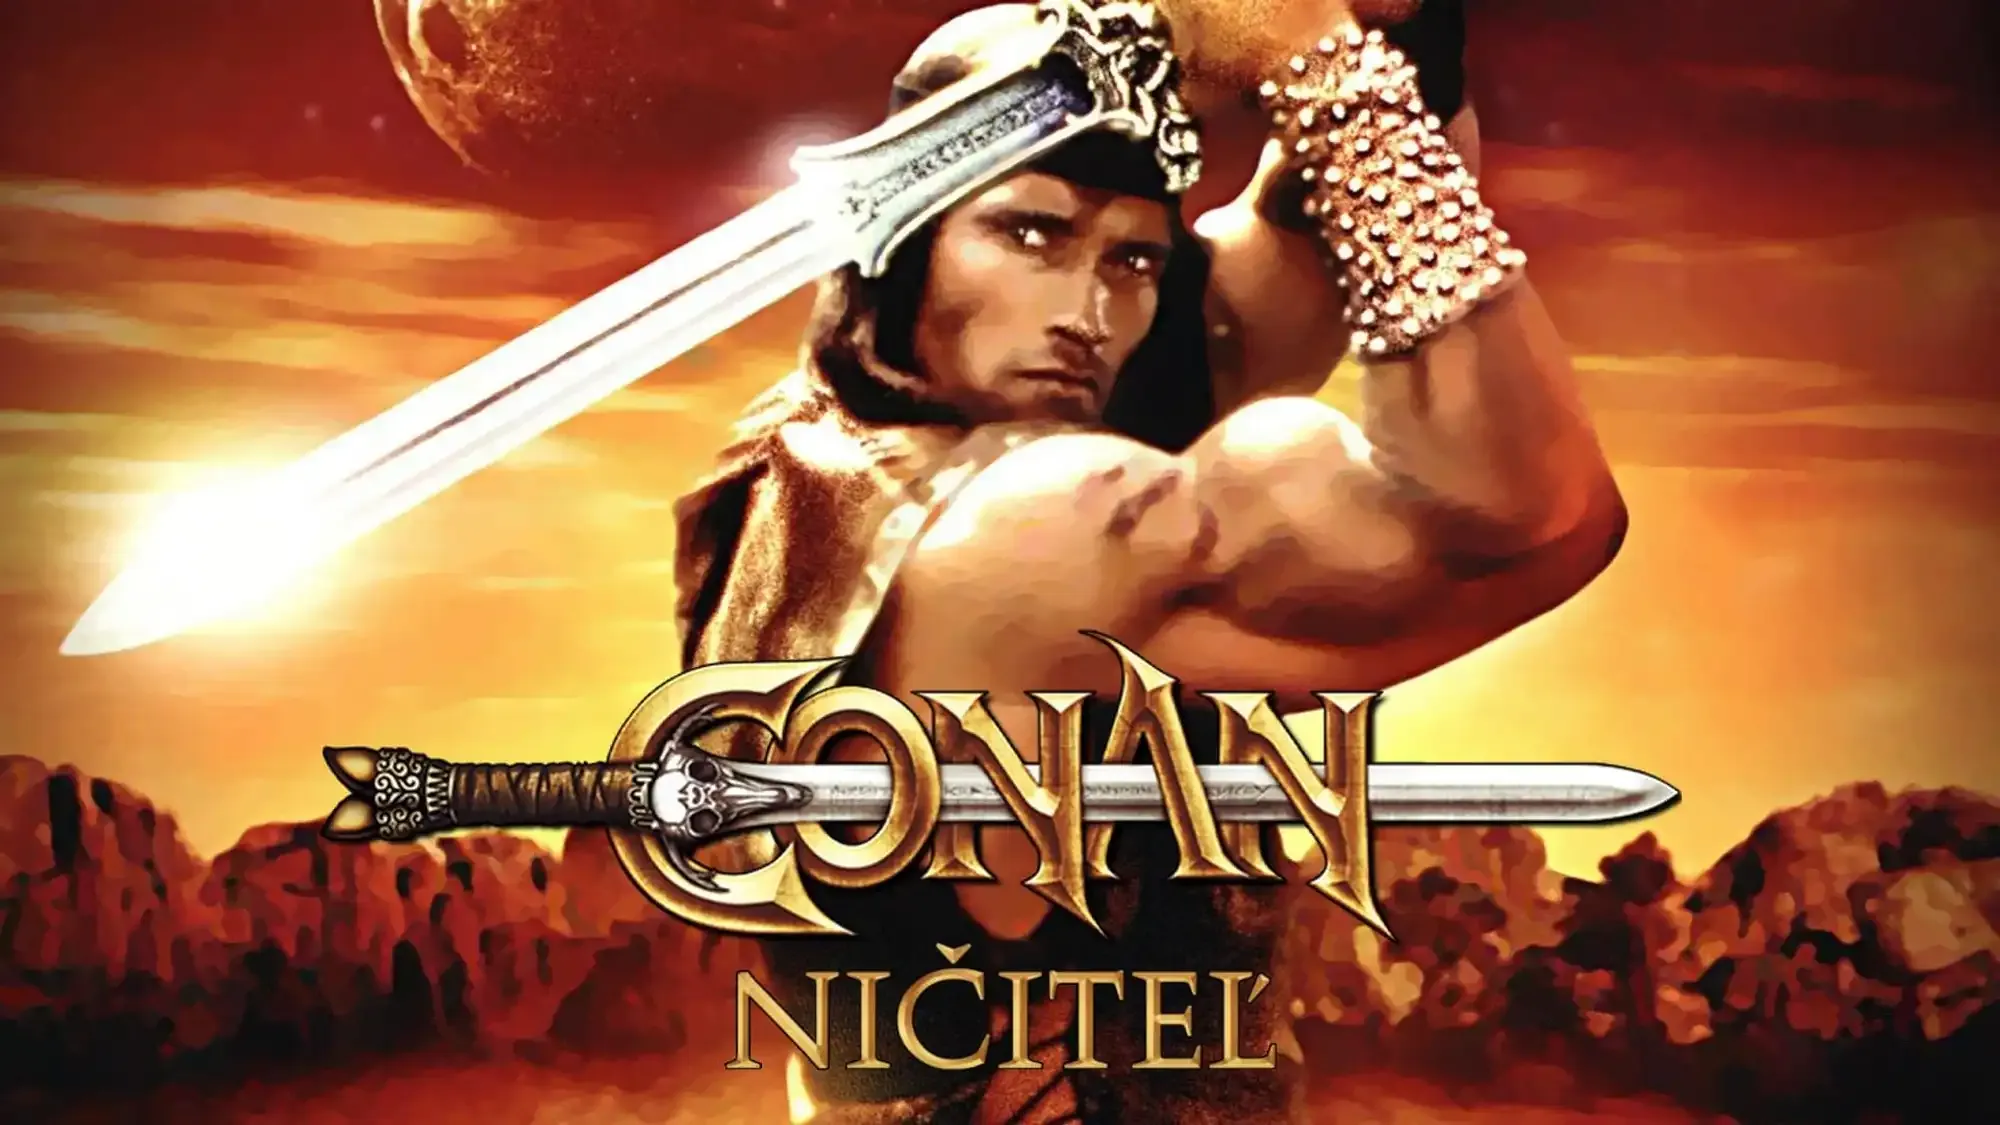 Conan the Destroyer movie review